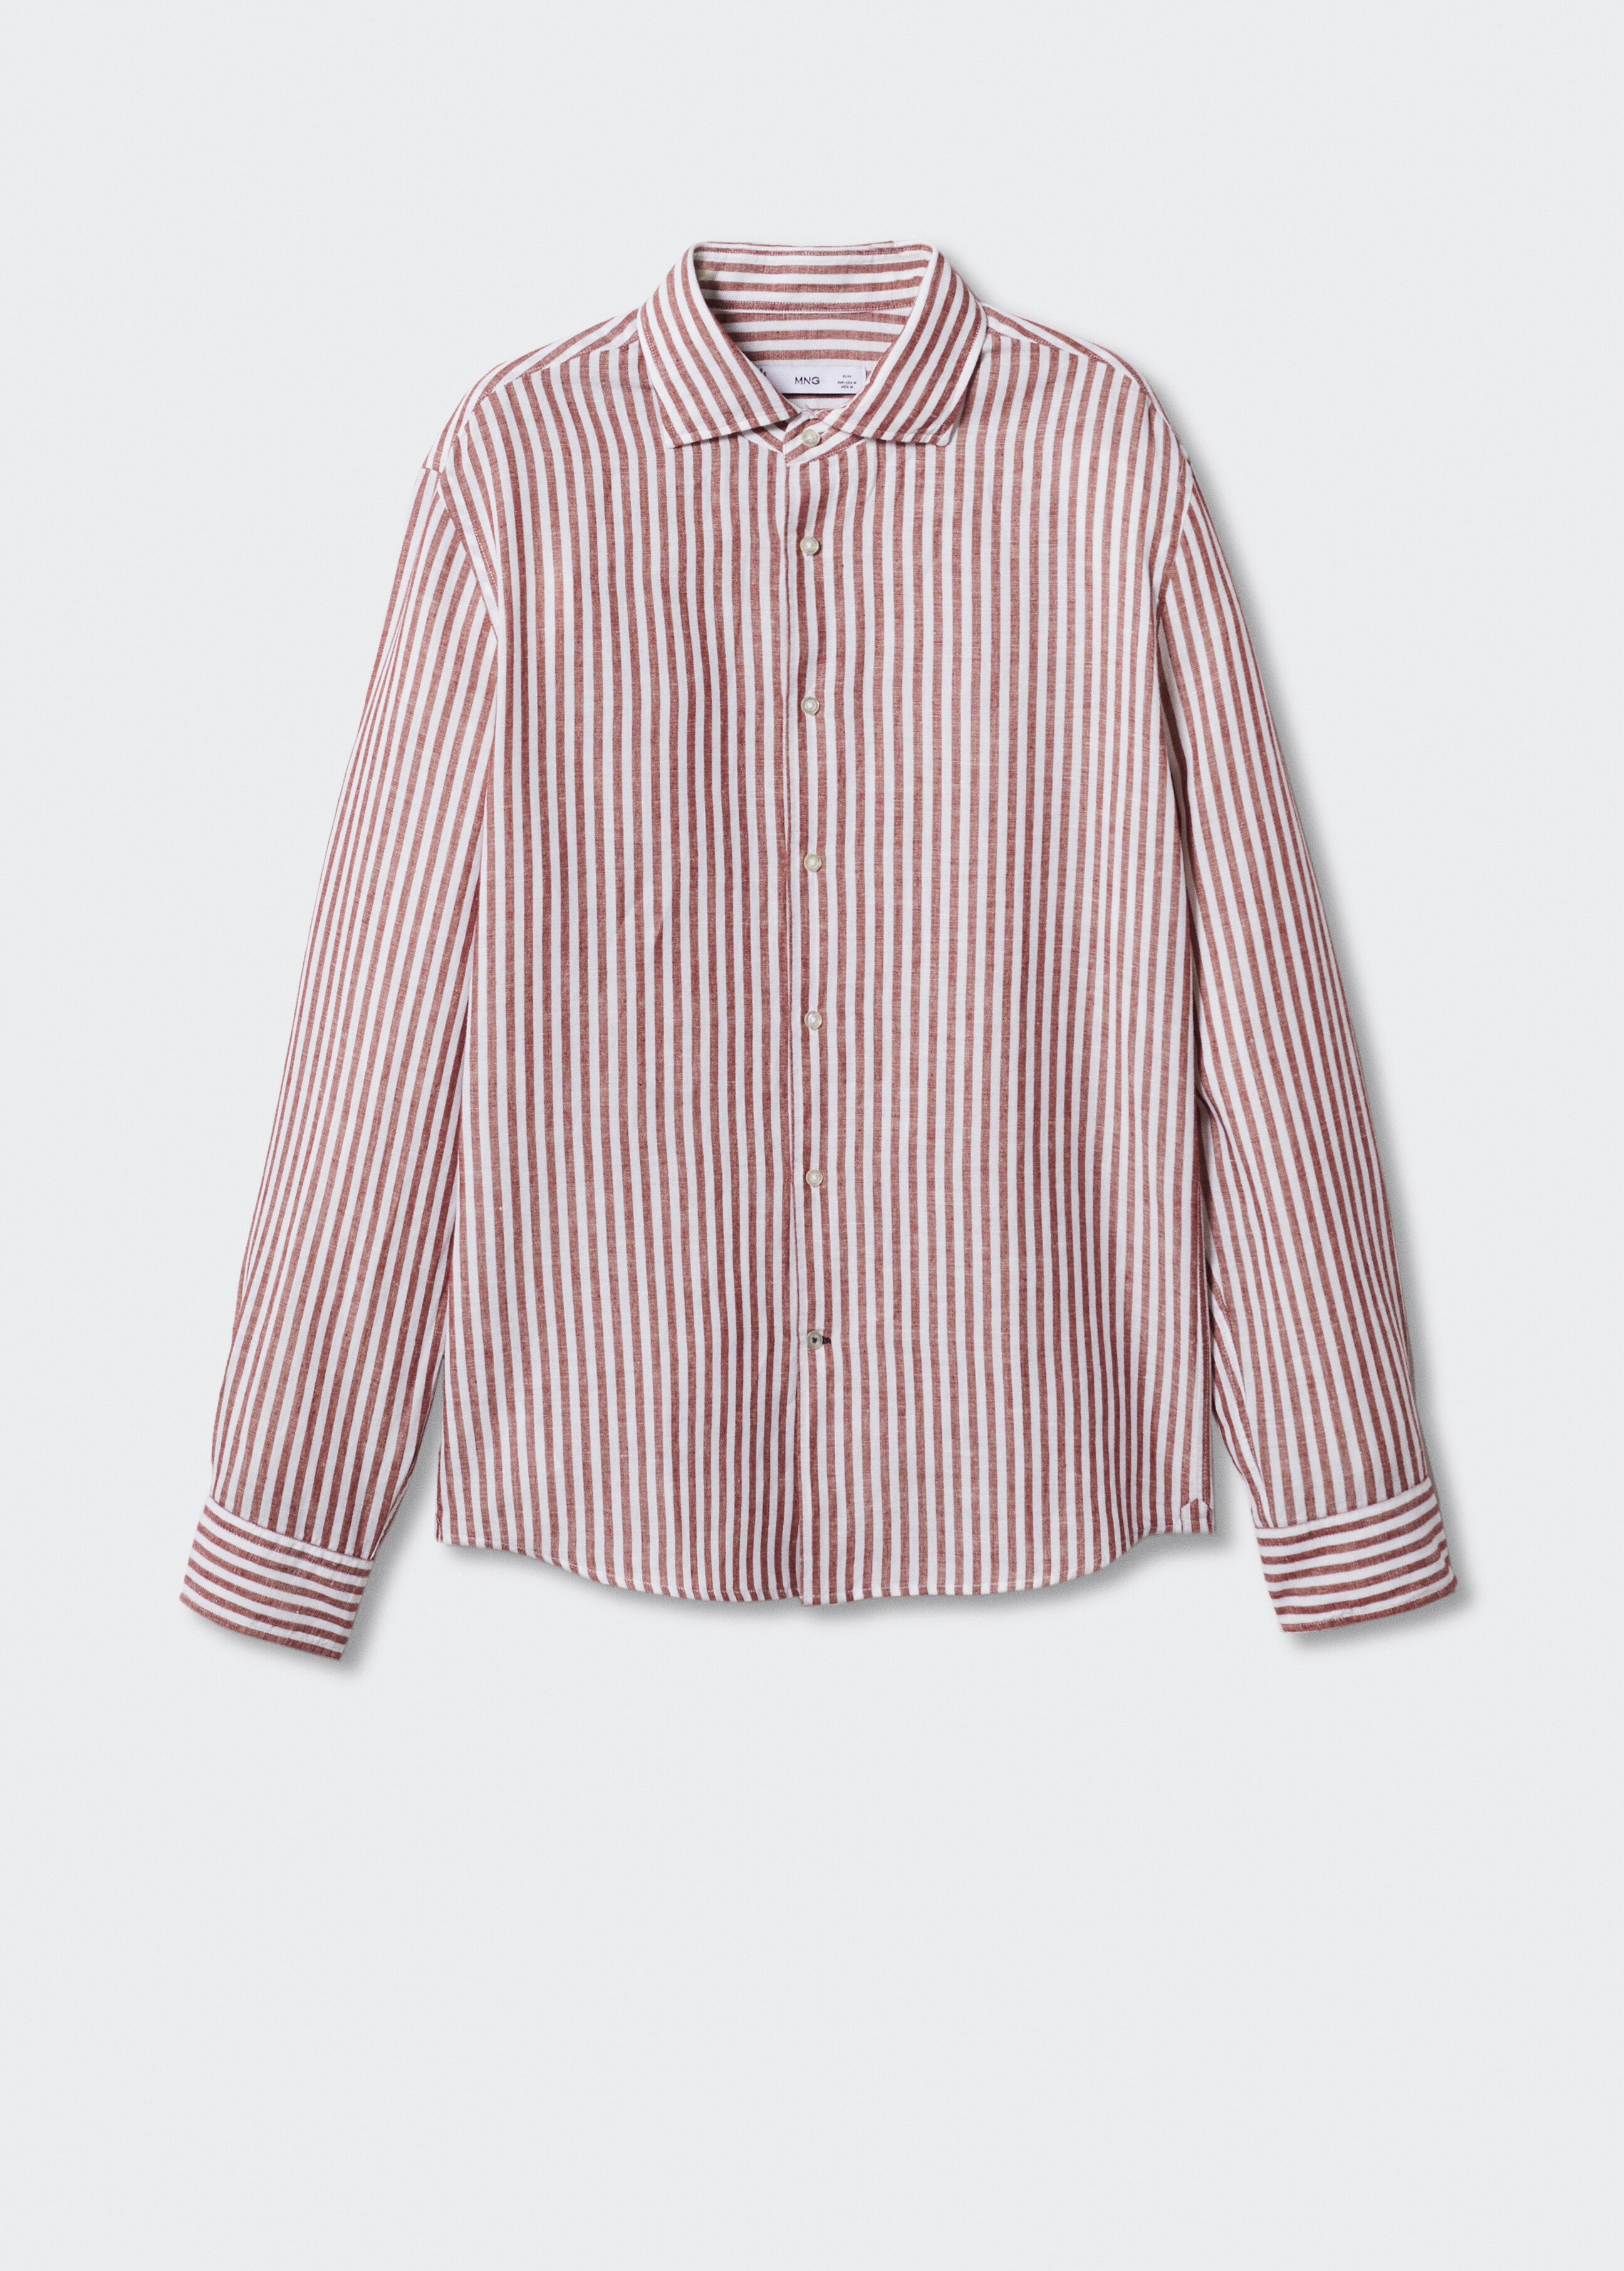 Slim fit striped linen shirt - Article without model